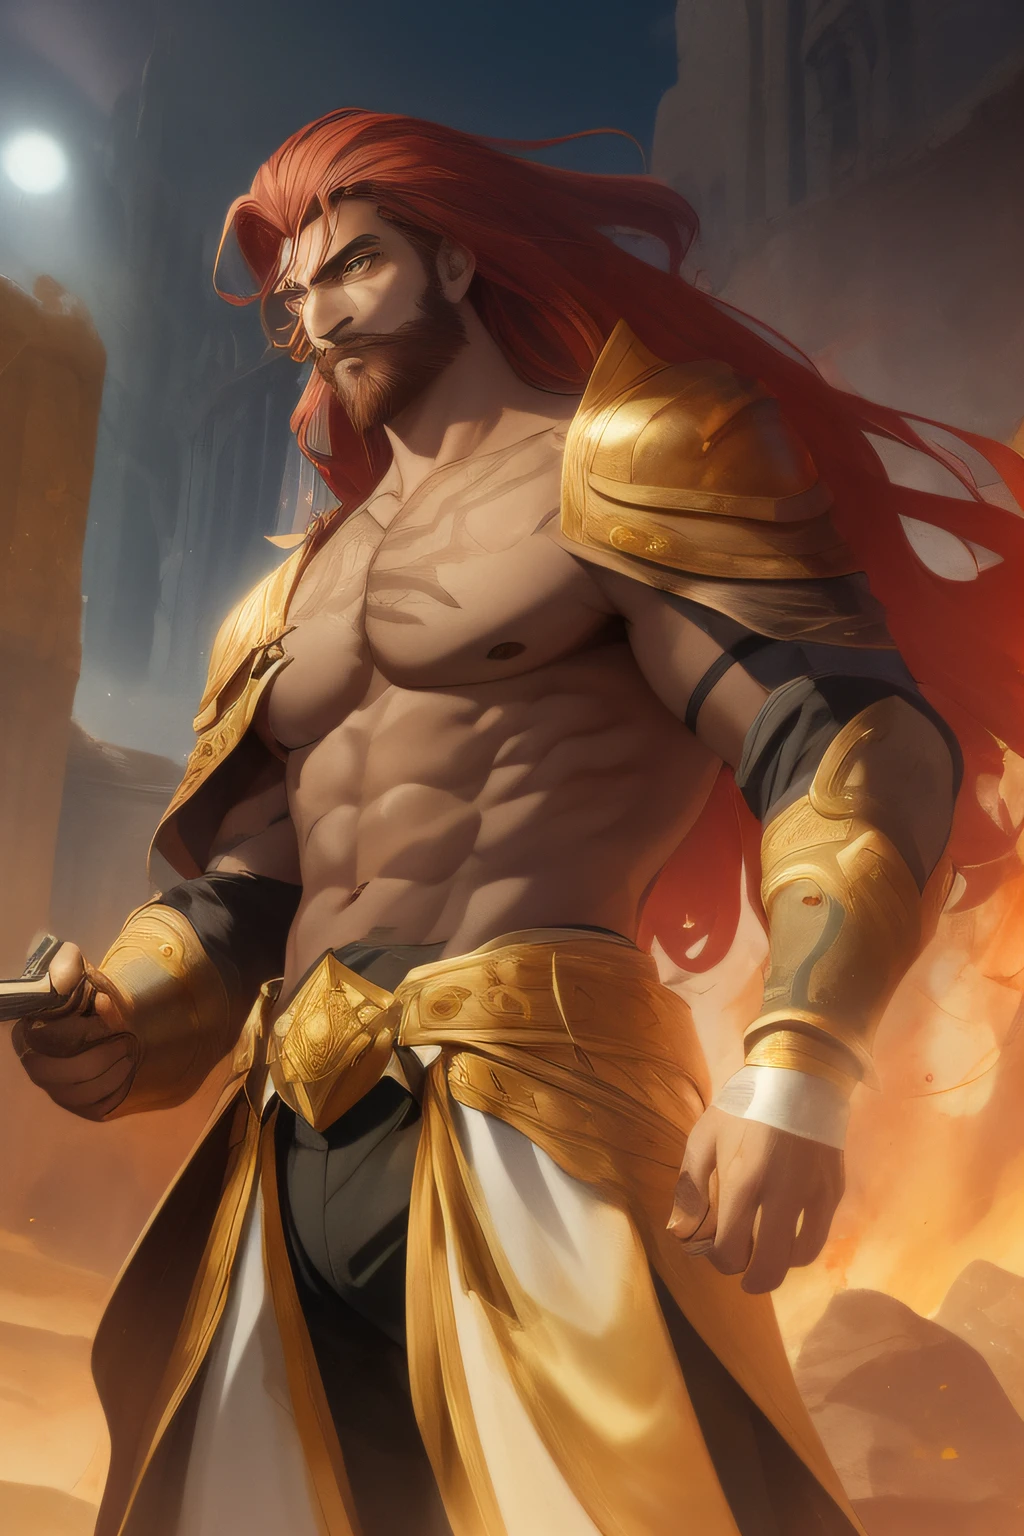 (Masterpiece artwork: 1.2), (best qualityer: 1.2), perfects eyes, face perfect, perfect  lighting, 1boy, mature man, long red hair, absurdly long red beard, steel armor, breastplate, Shin guard, pauldrons, gauntlets, fancy, outdoor detailed background